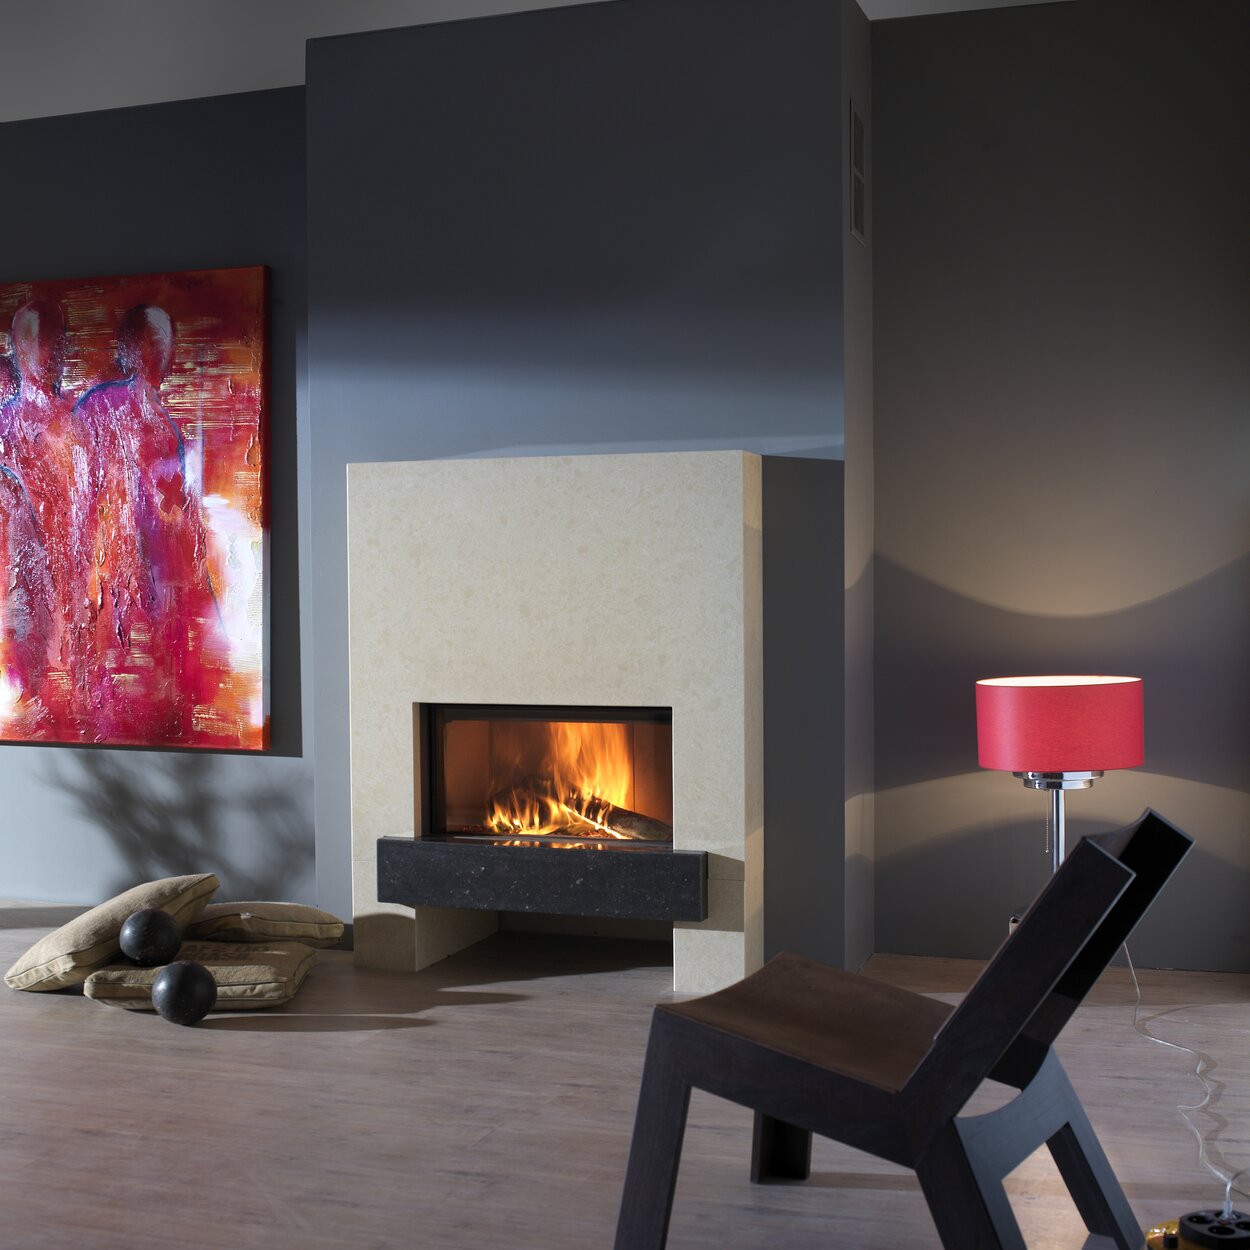 Wood fireplace W70/33F by Kalfire with natural stone cladding in cream-coloured stone in front of a grey wall with pink decoration